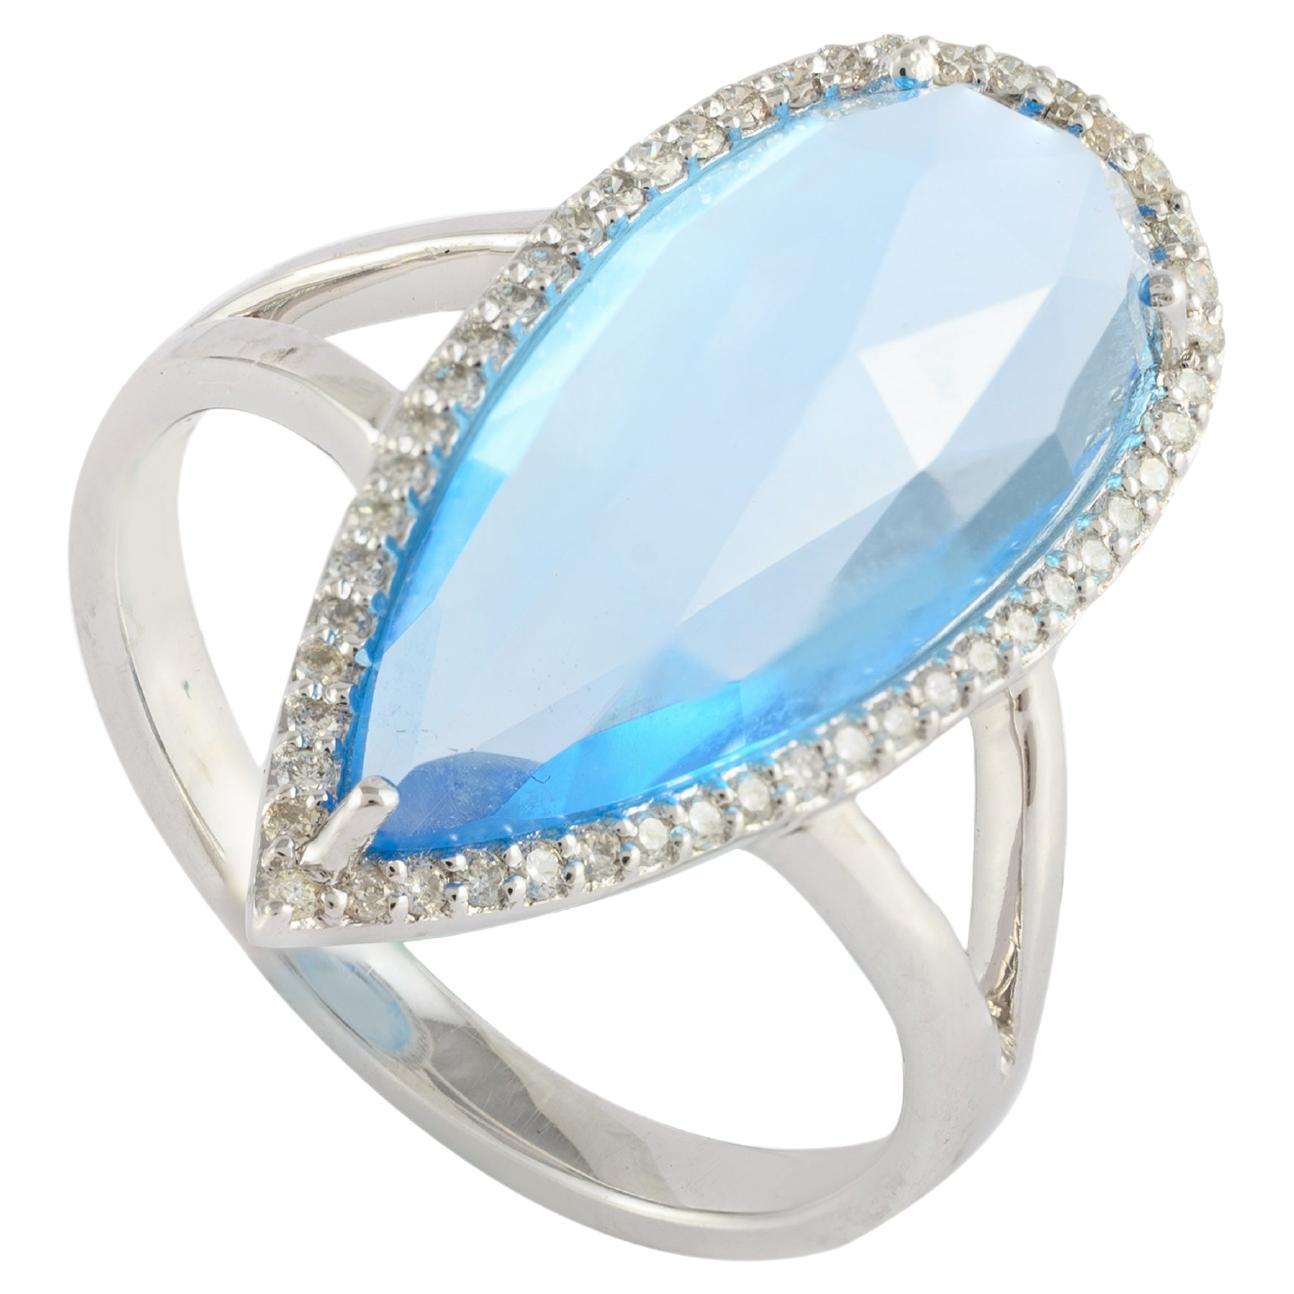 For Sale:  Glitzy 6.82 Carat Pear Blue Topaz Diamond Cocktail Ring in 14k Solid White Gold